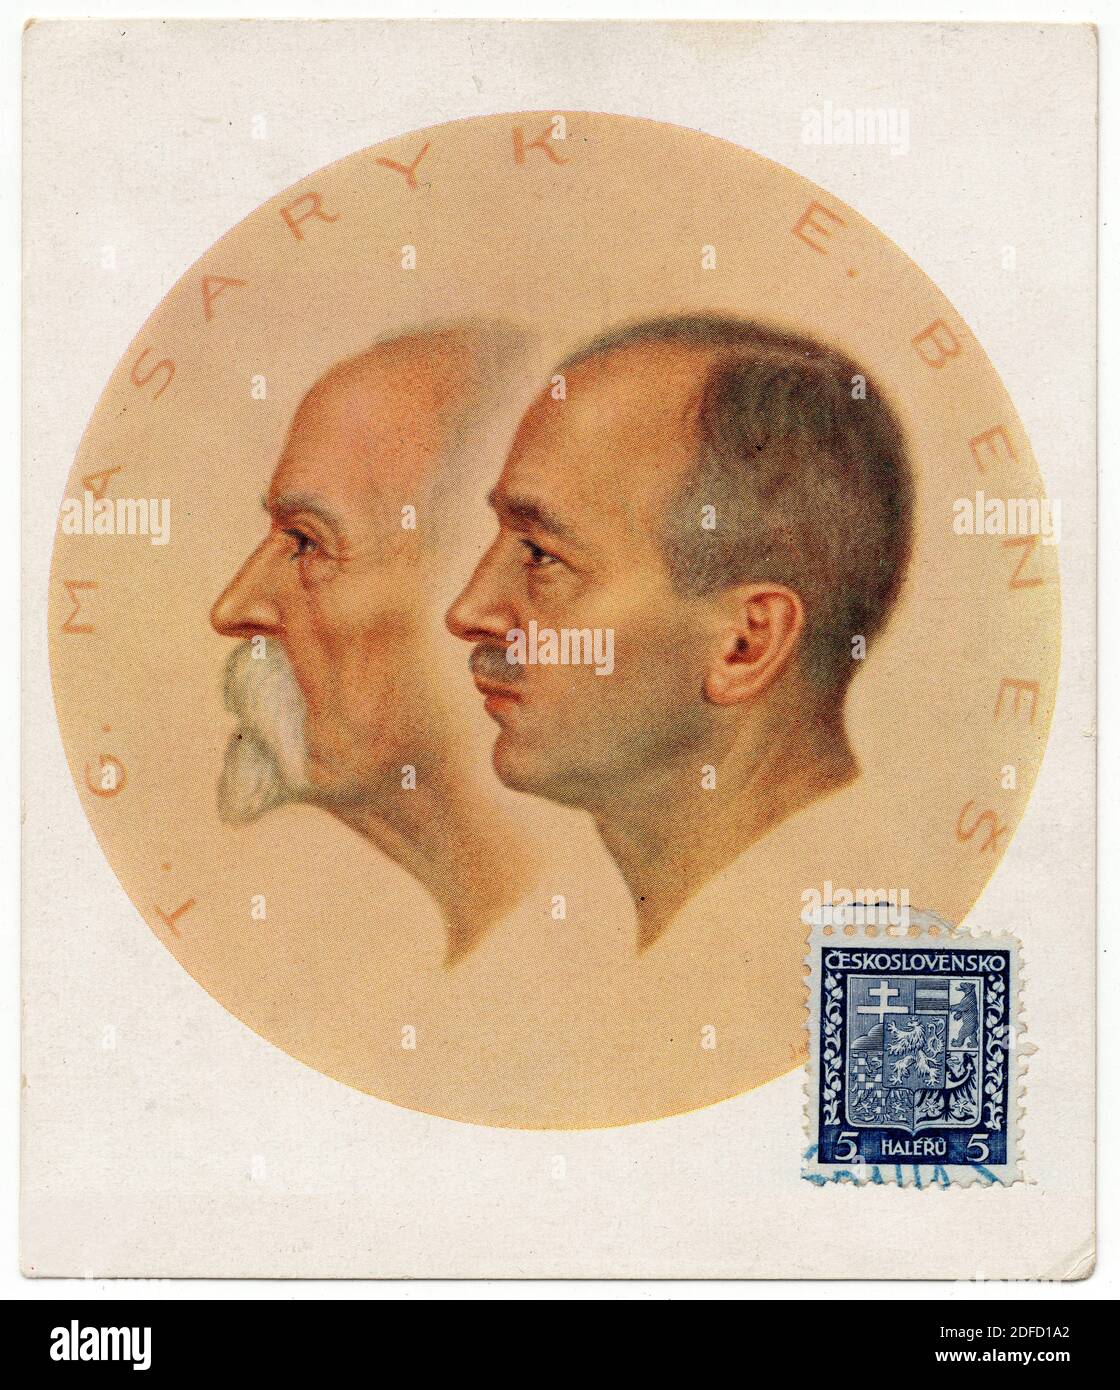 Czechoslovak presidents Tomáš Garrigue Masaryk and Edvard Beneš depicted from left to right in the double portrait by Czech artist Jóža Bělohorský (1938) published in the Czechoslovak vintage postcard in occasion of the 20th anniversary of the independence of Czechoslovakia. Courtesy of the Azoor Postcard Collection. Stock Photo